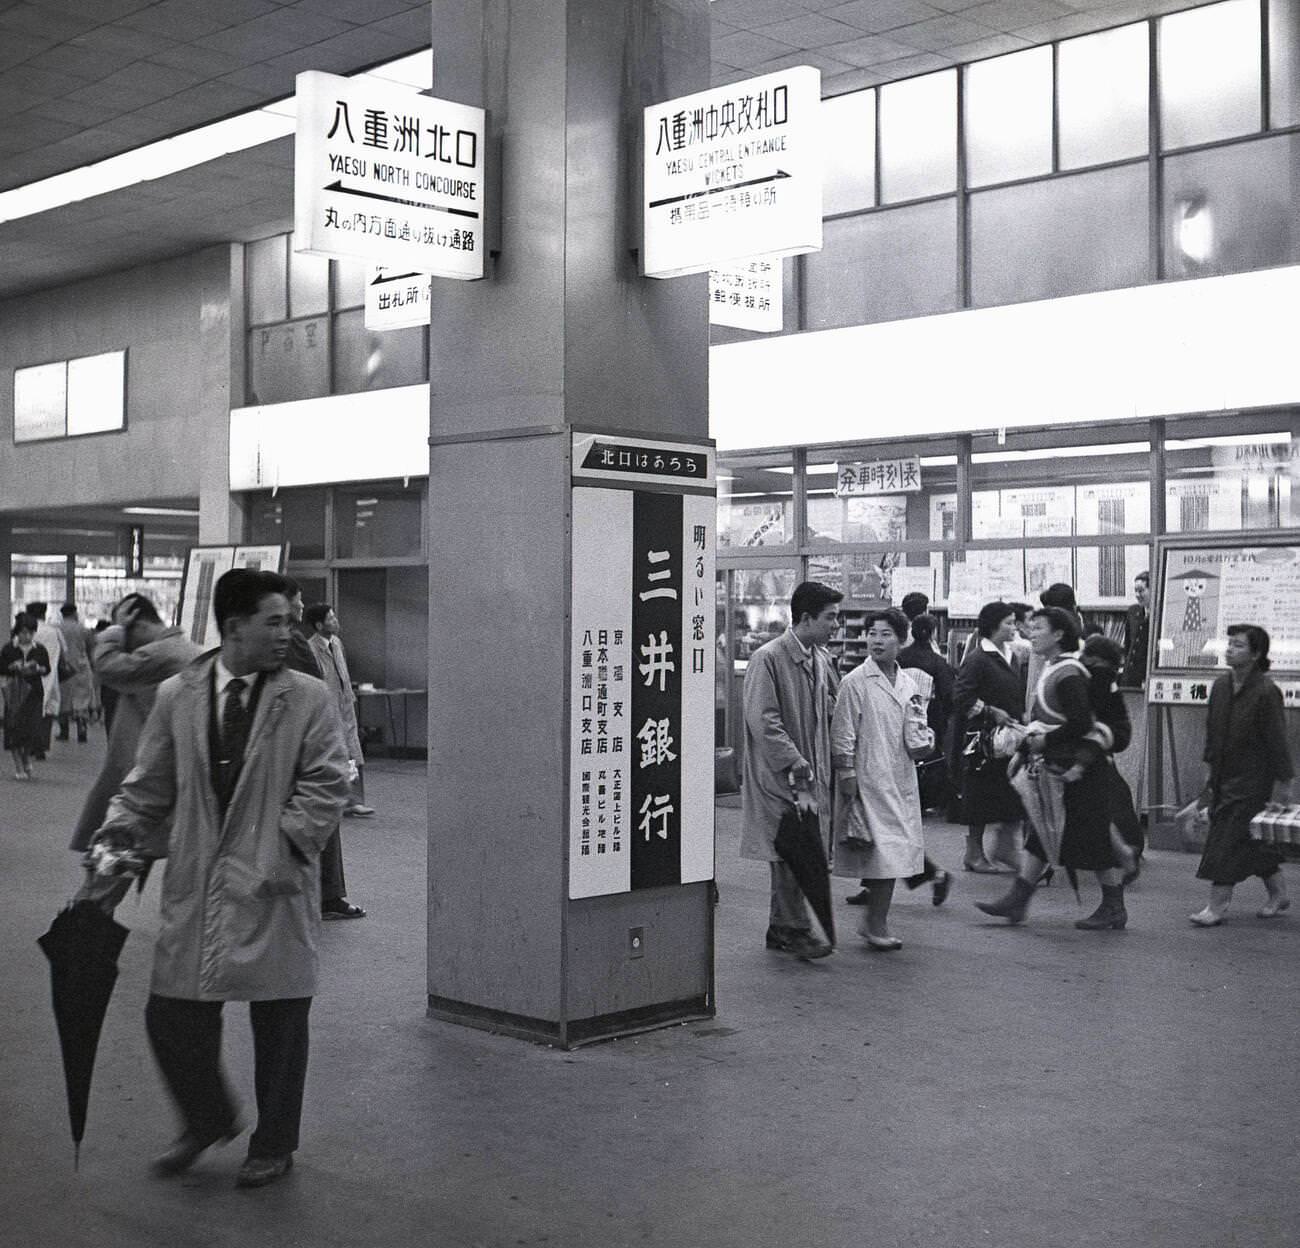 A view inside the Tokyo metro, 1950s.